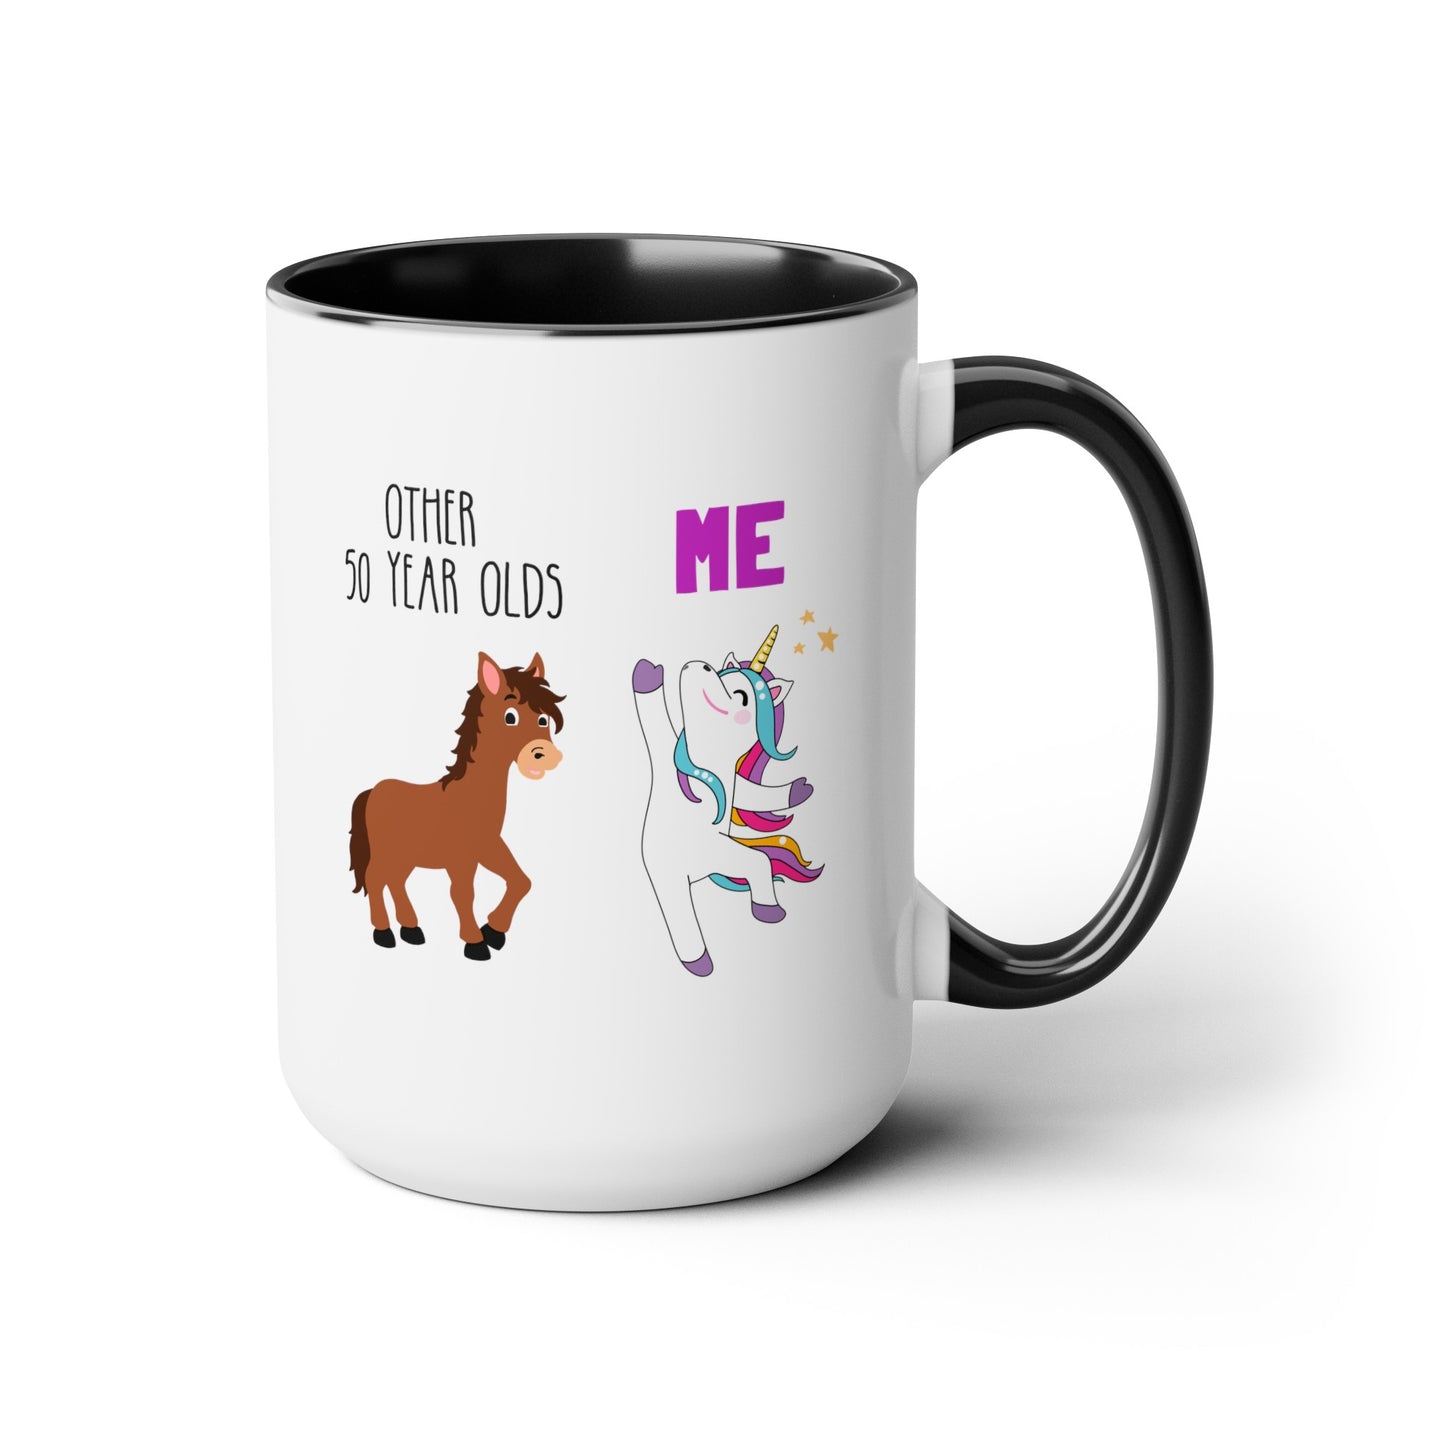 Other 50 Year Olds Vs Me 15oz white with black accent funny large coffee mug gift for friend family birthday personalized custom age horse unicorn waveywares wavey wares wavywares wavy wares